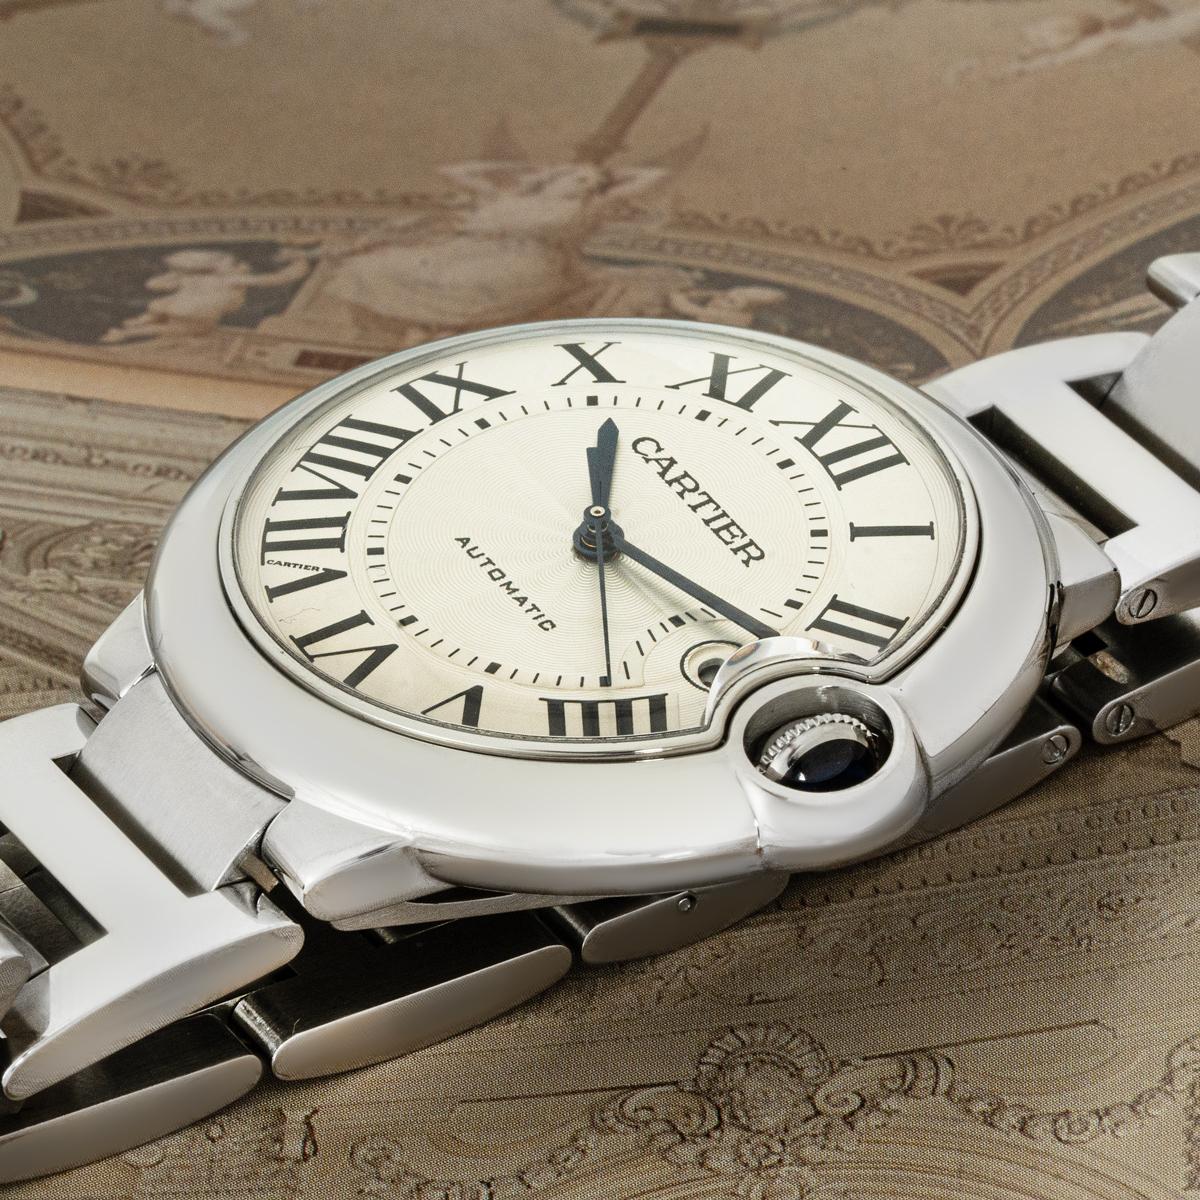 A 42mm Ballon Bleu from Cartier in stainless steel. Featuring a silvered guilloche dial with roman numerals, a date display, blued-steel sword-shaped hands, and a Cartier signature hidden at VII. The watch features a fixed stainless steel bezel and